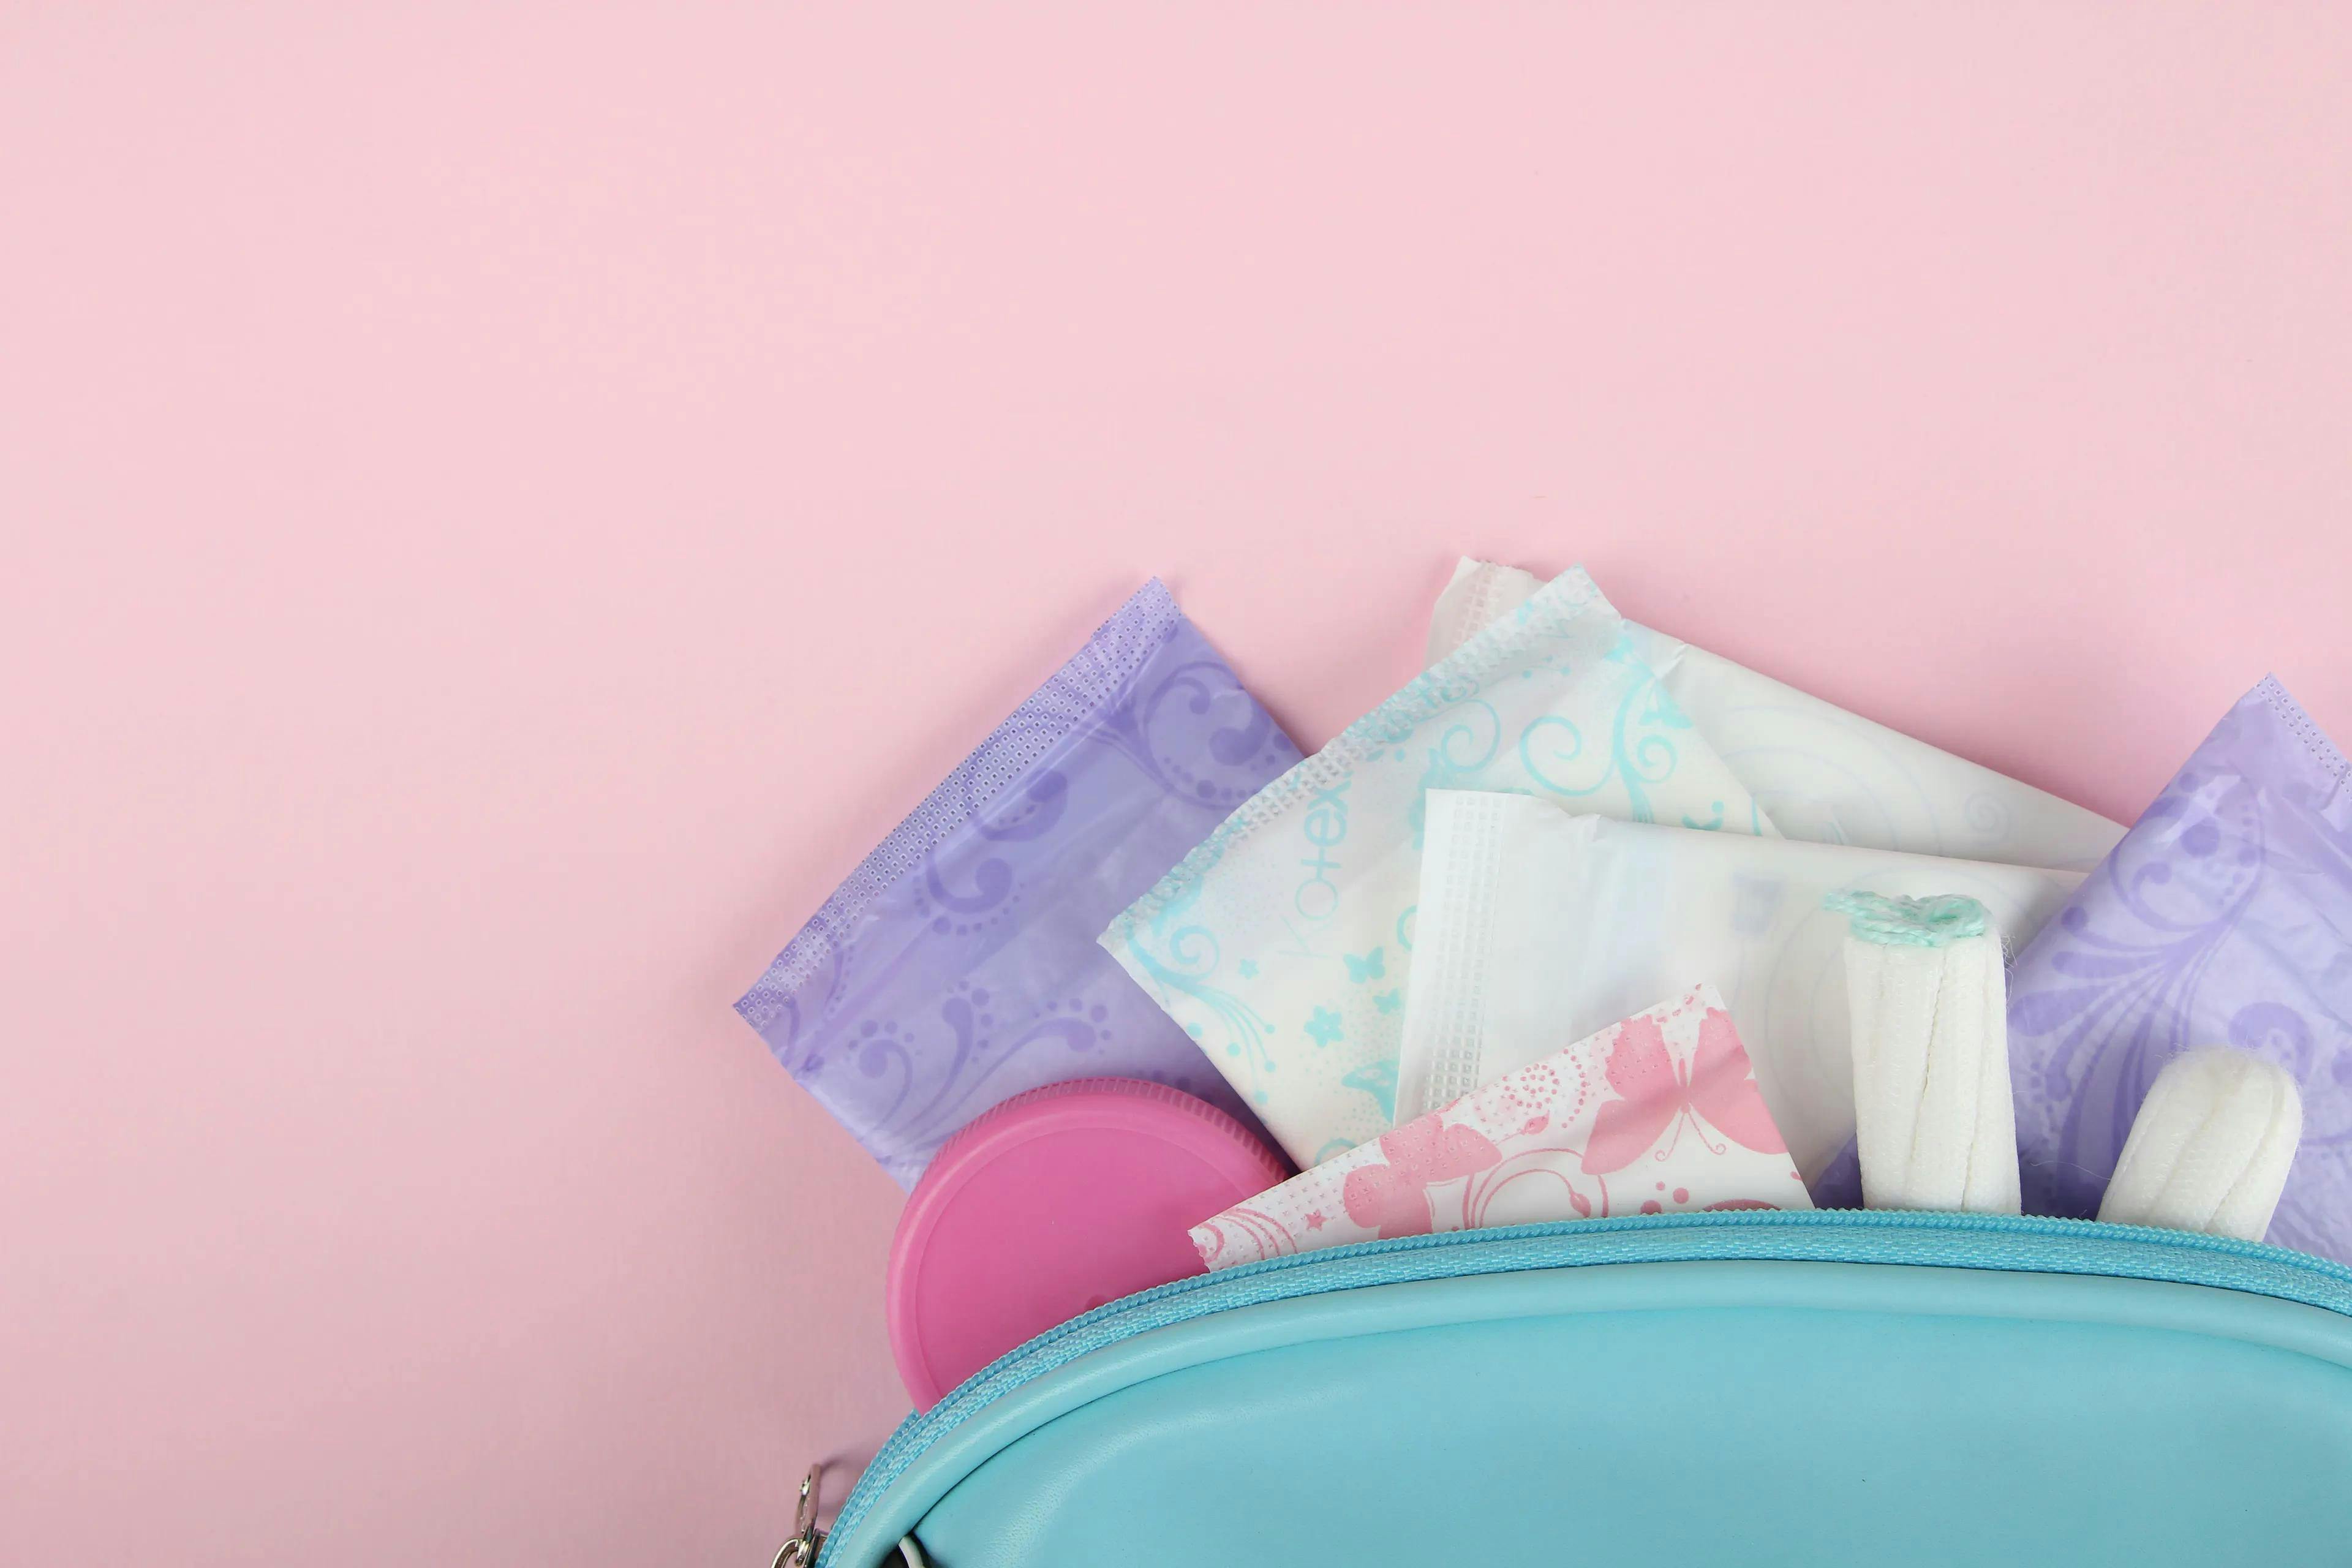 AAP backs statement to eliminate period poverty, increase youth’s access to menstrual hygiene products